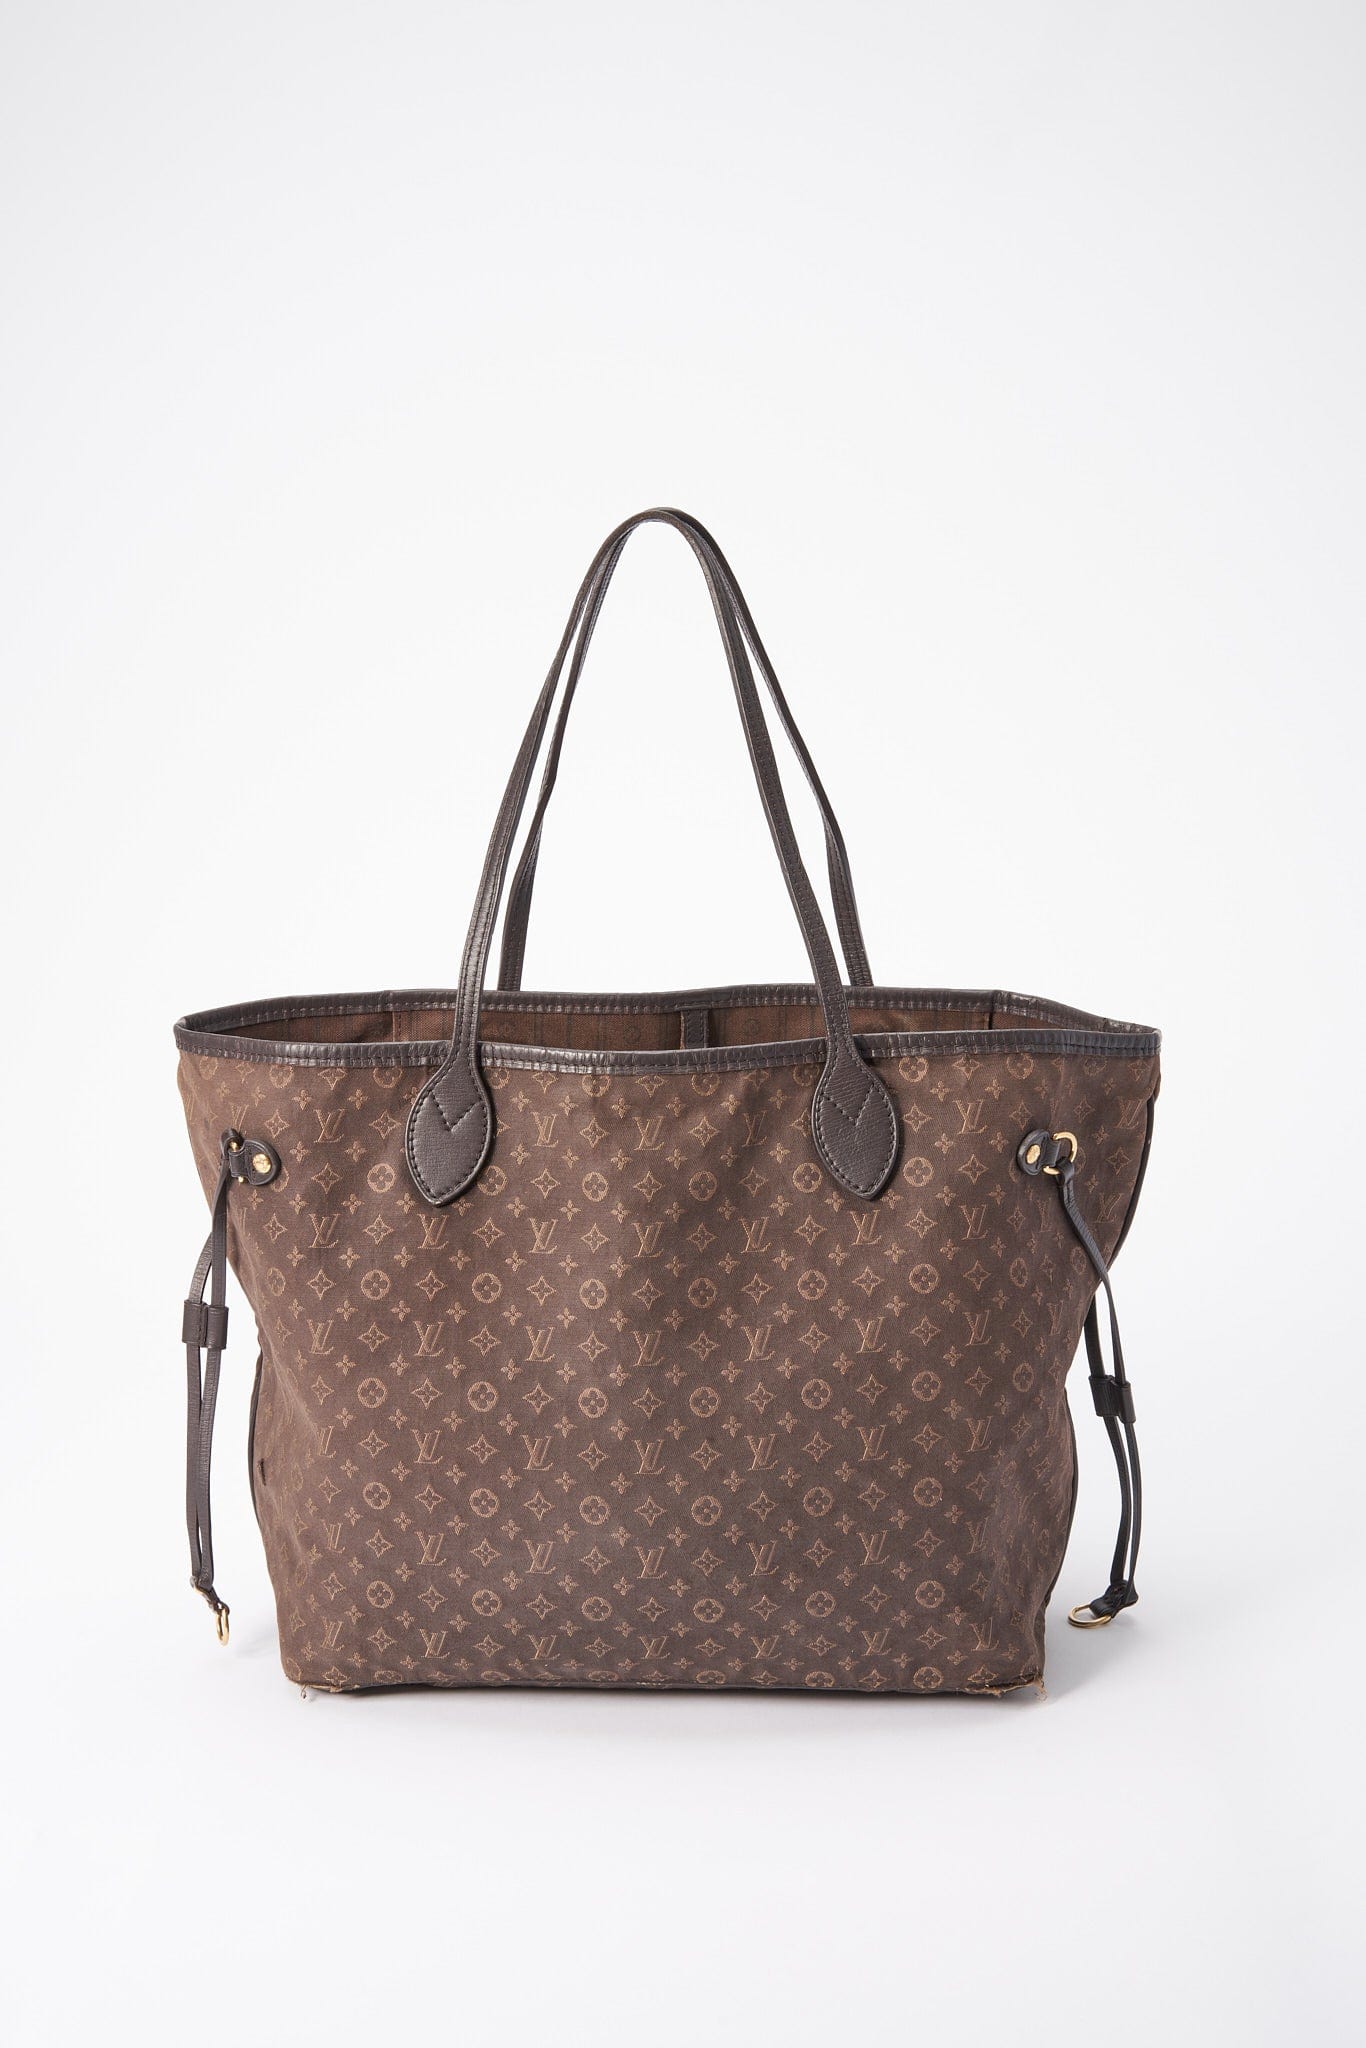 Louis Vuitton Neverfull MM Wear and Tear